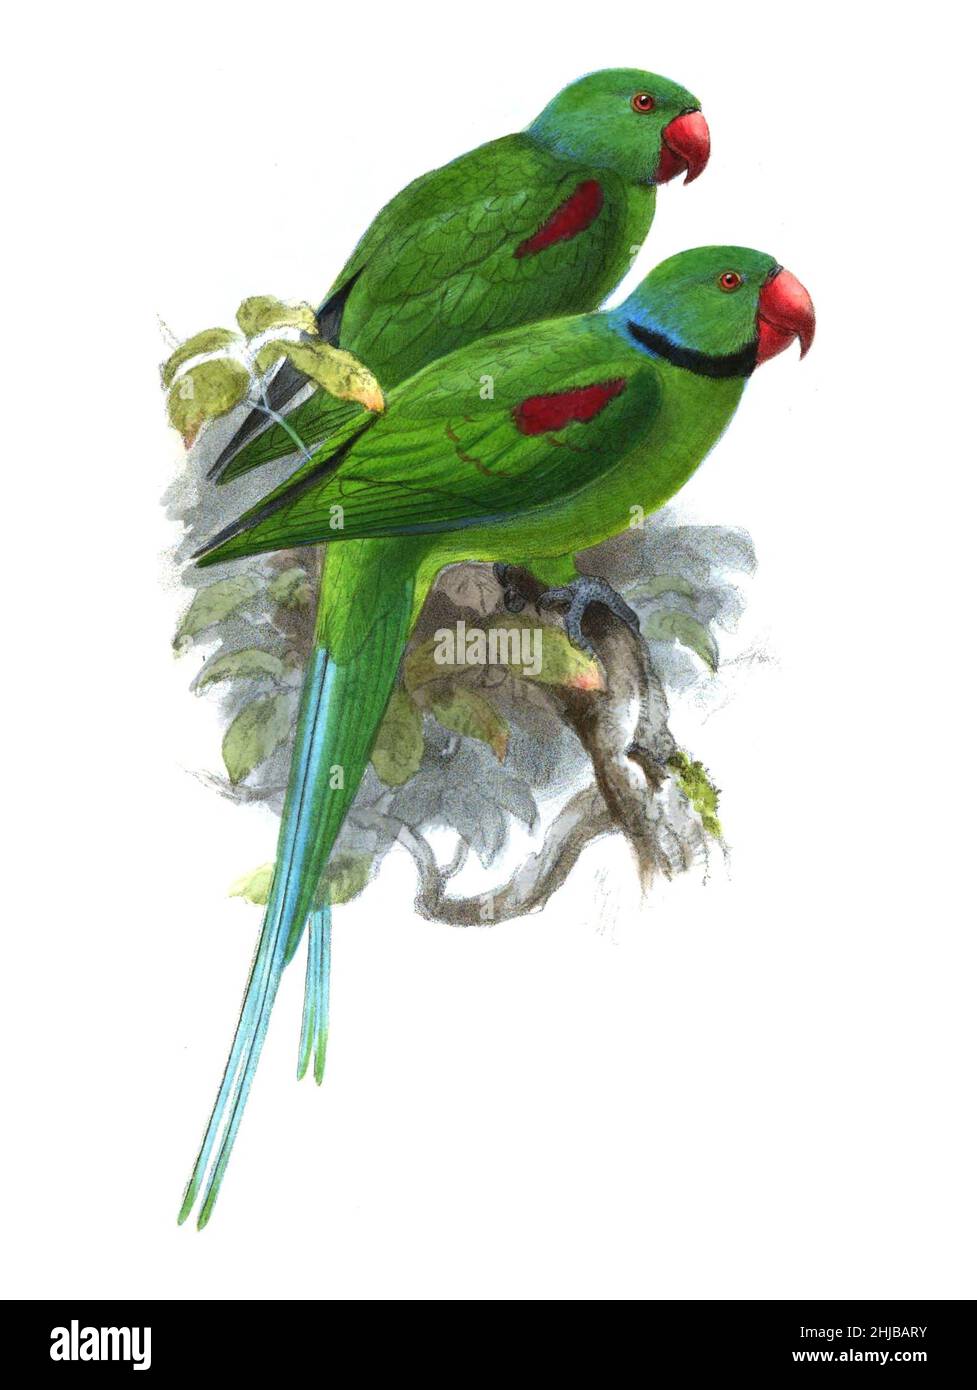 The Seychelles parakeet or Seychelles Island parrot (Psittacula wardi syn Palaeornis wardi) is an extinct species of parrot that was endemic to the Seychelles in the Indian Ocean. It was scientifically named Palaeornis wardi by the British ornithologist Edward Newton in 1867 Stock Photo